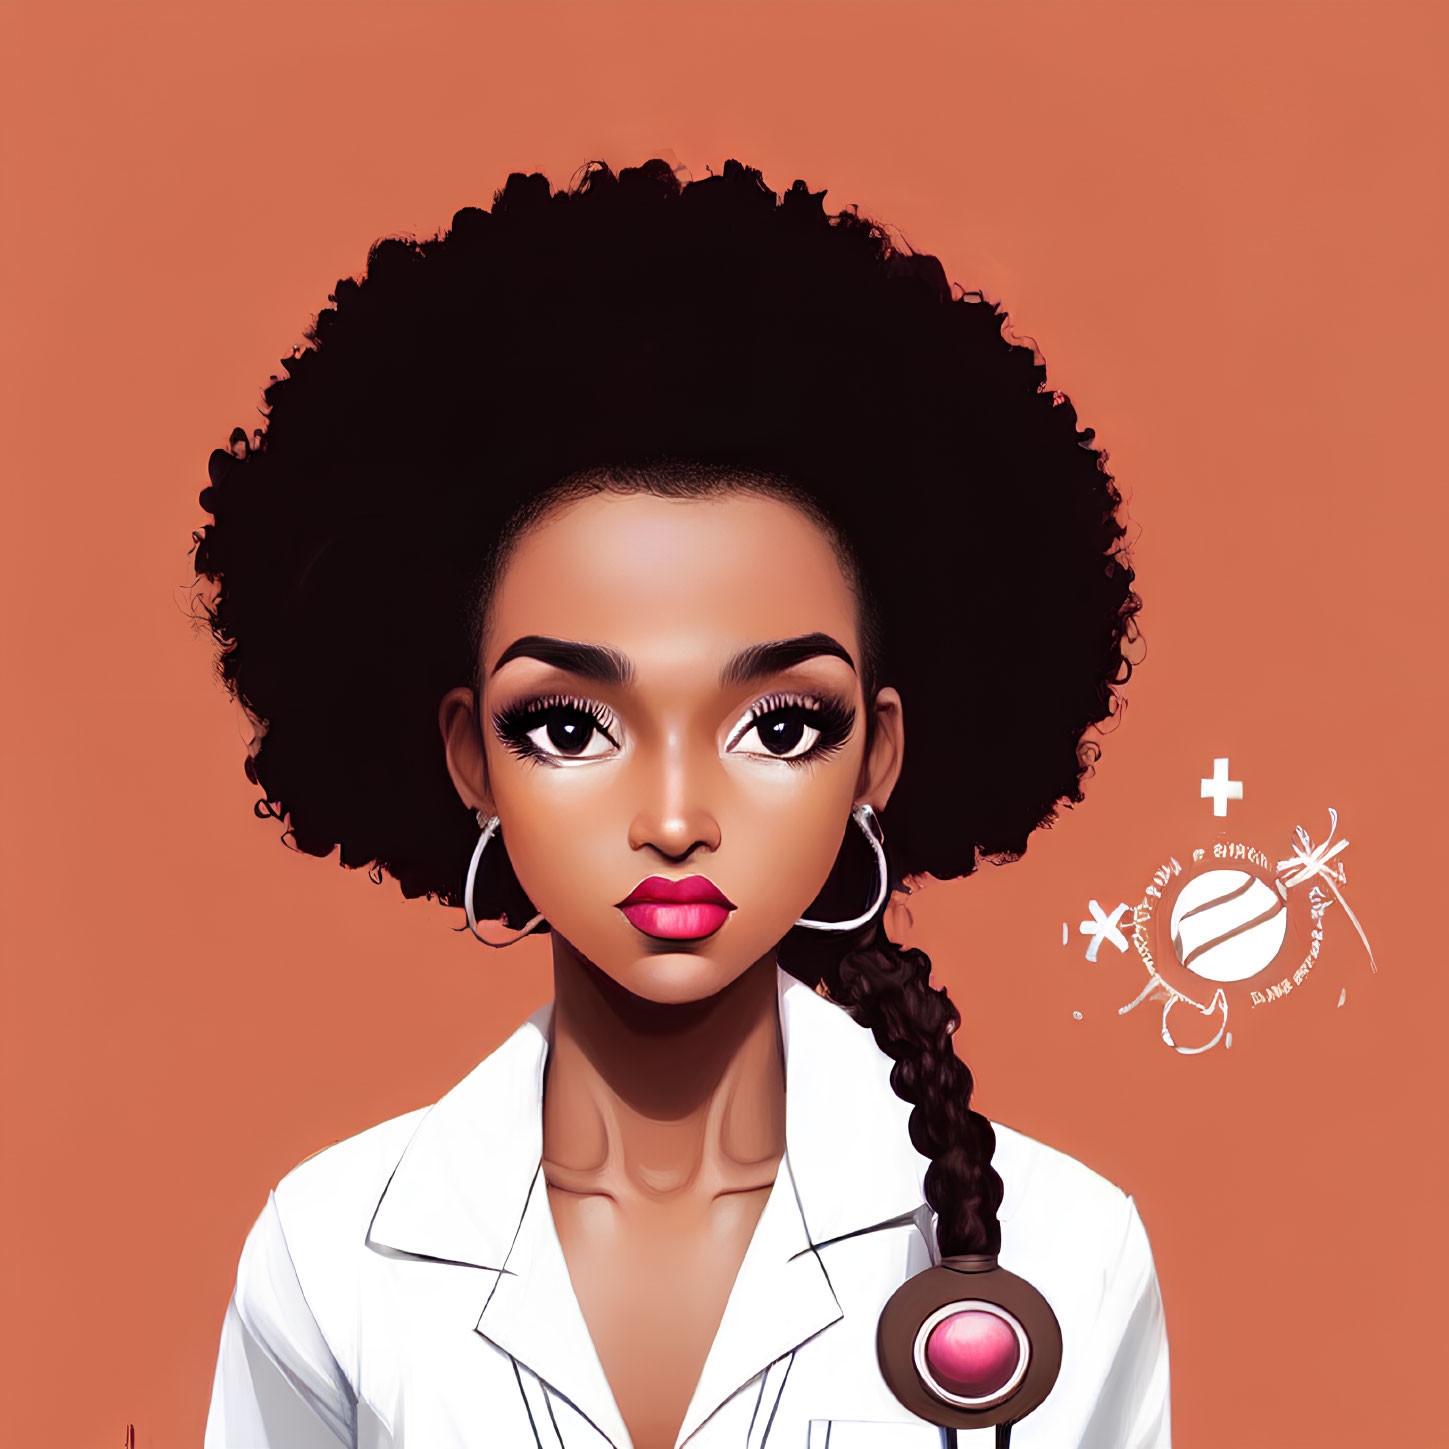 Detailed illustration of woman with voluminous afro, hoop earrings, subtle makeup, and white coat on